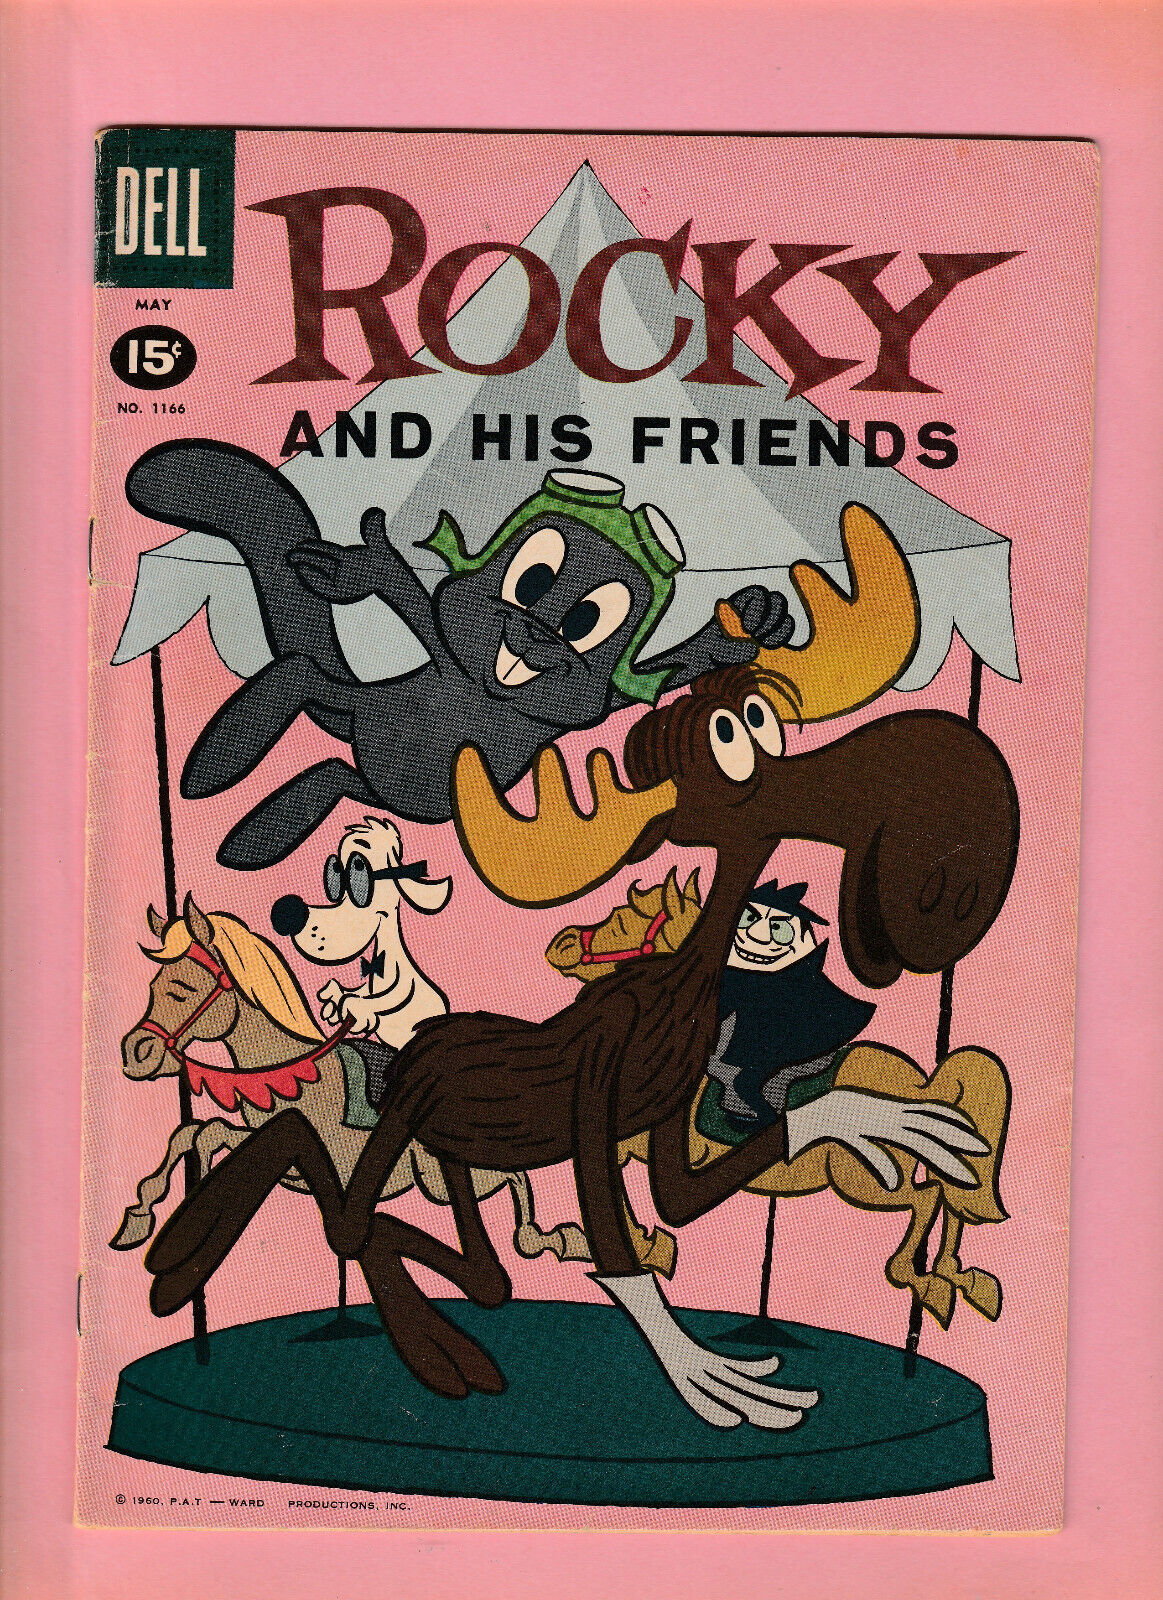 ROCKY AND HIS FRIENDS #3, VG, Dell Publishing #1166, (1961)